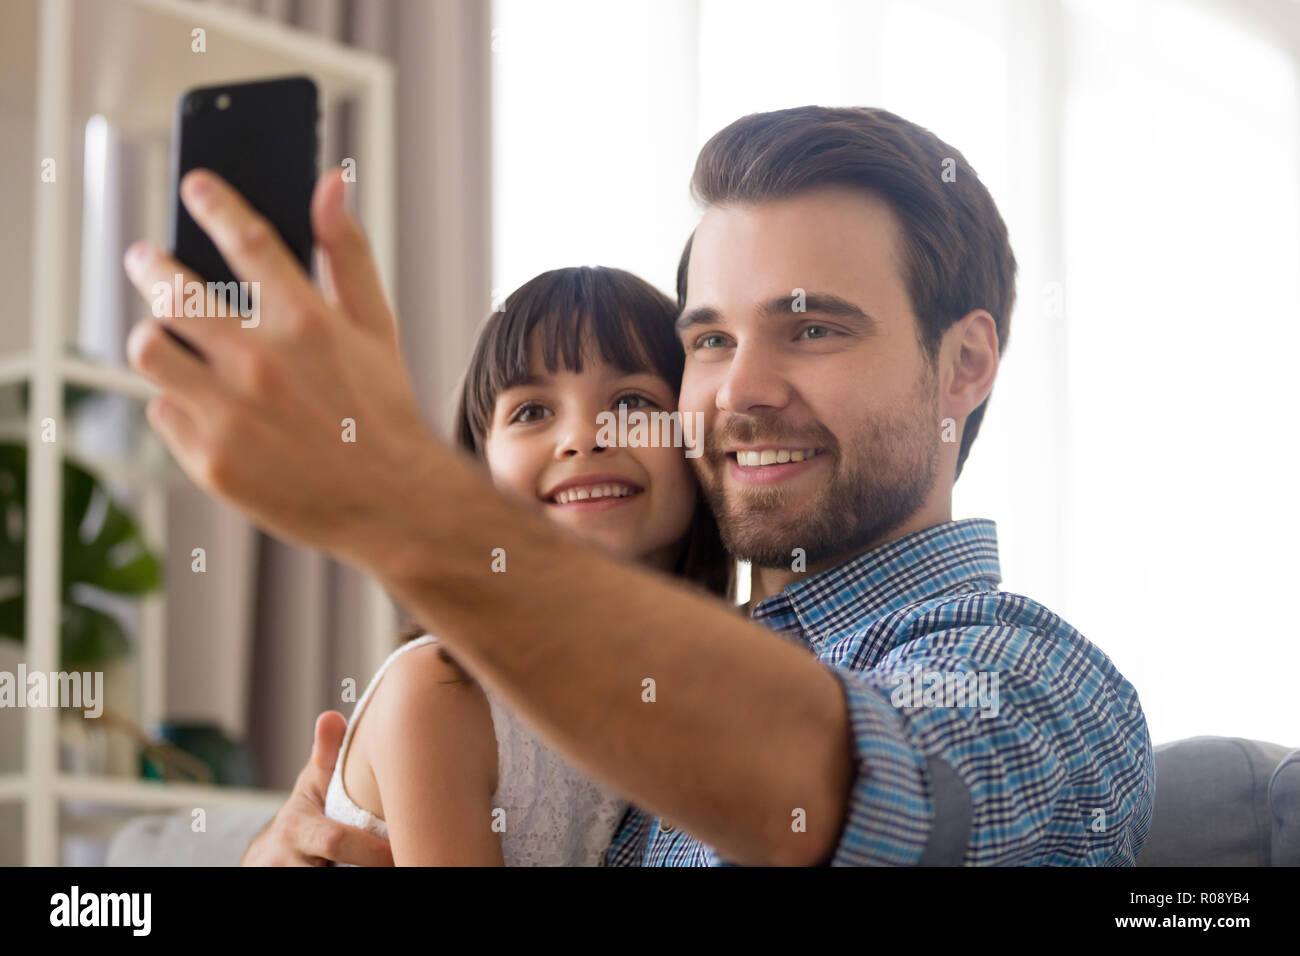 Father and daughter using smartphone take selfie photography Stock Photo